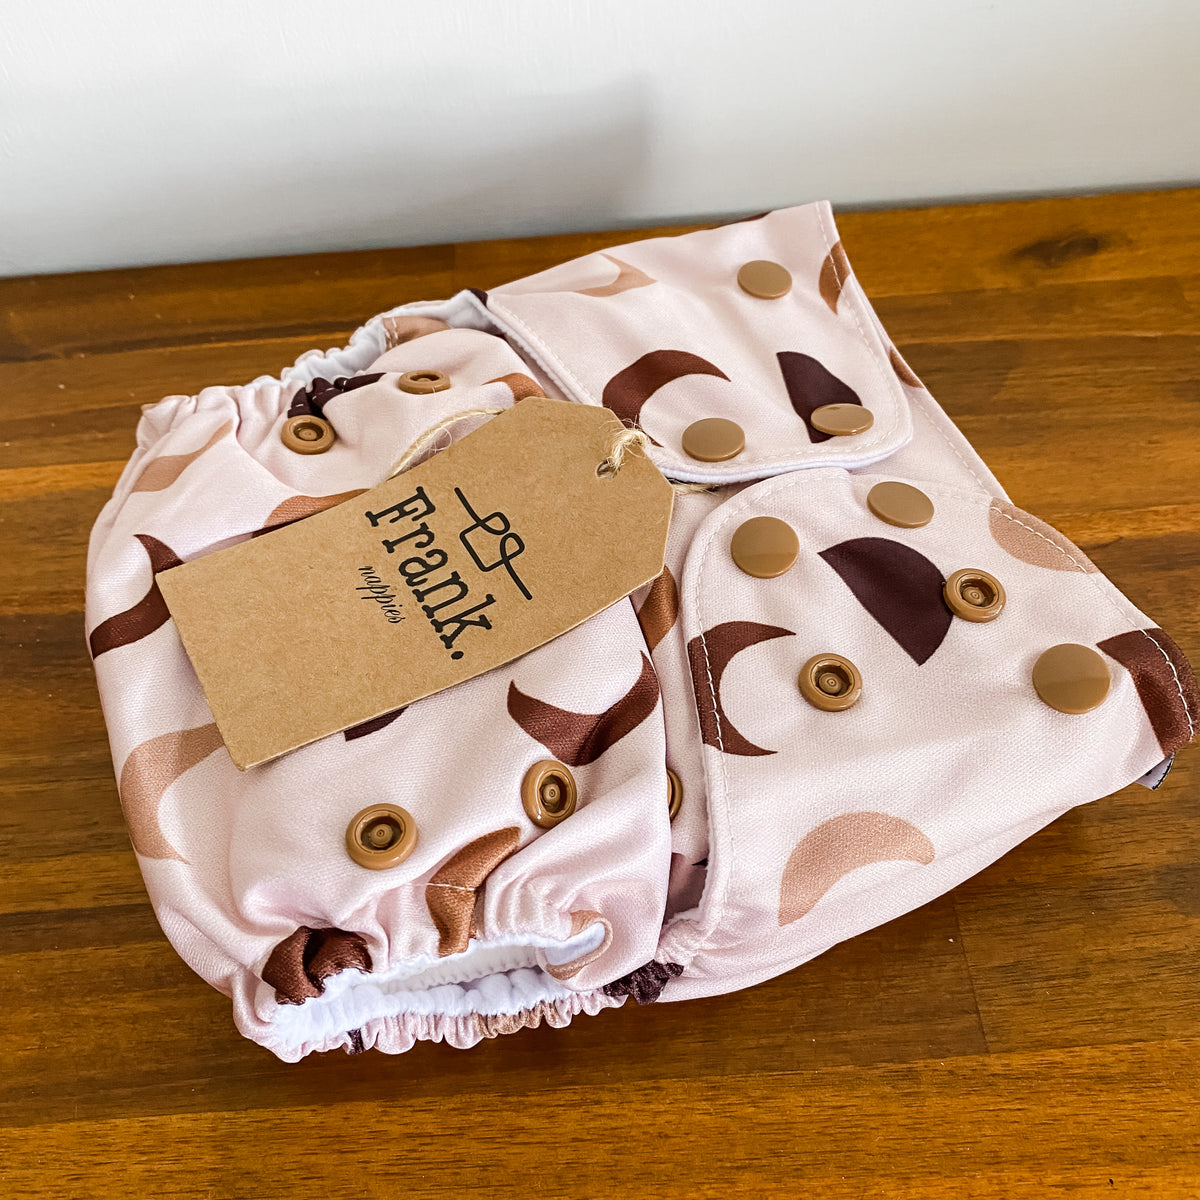 Best cloth nappies in Australia. One size fits most reusable nappies for the eco conscious family